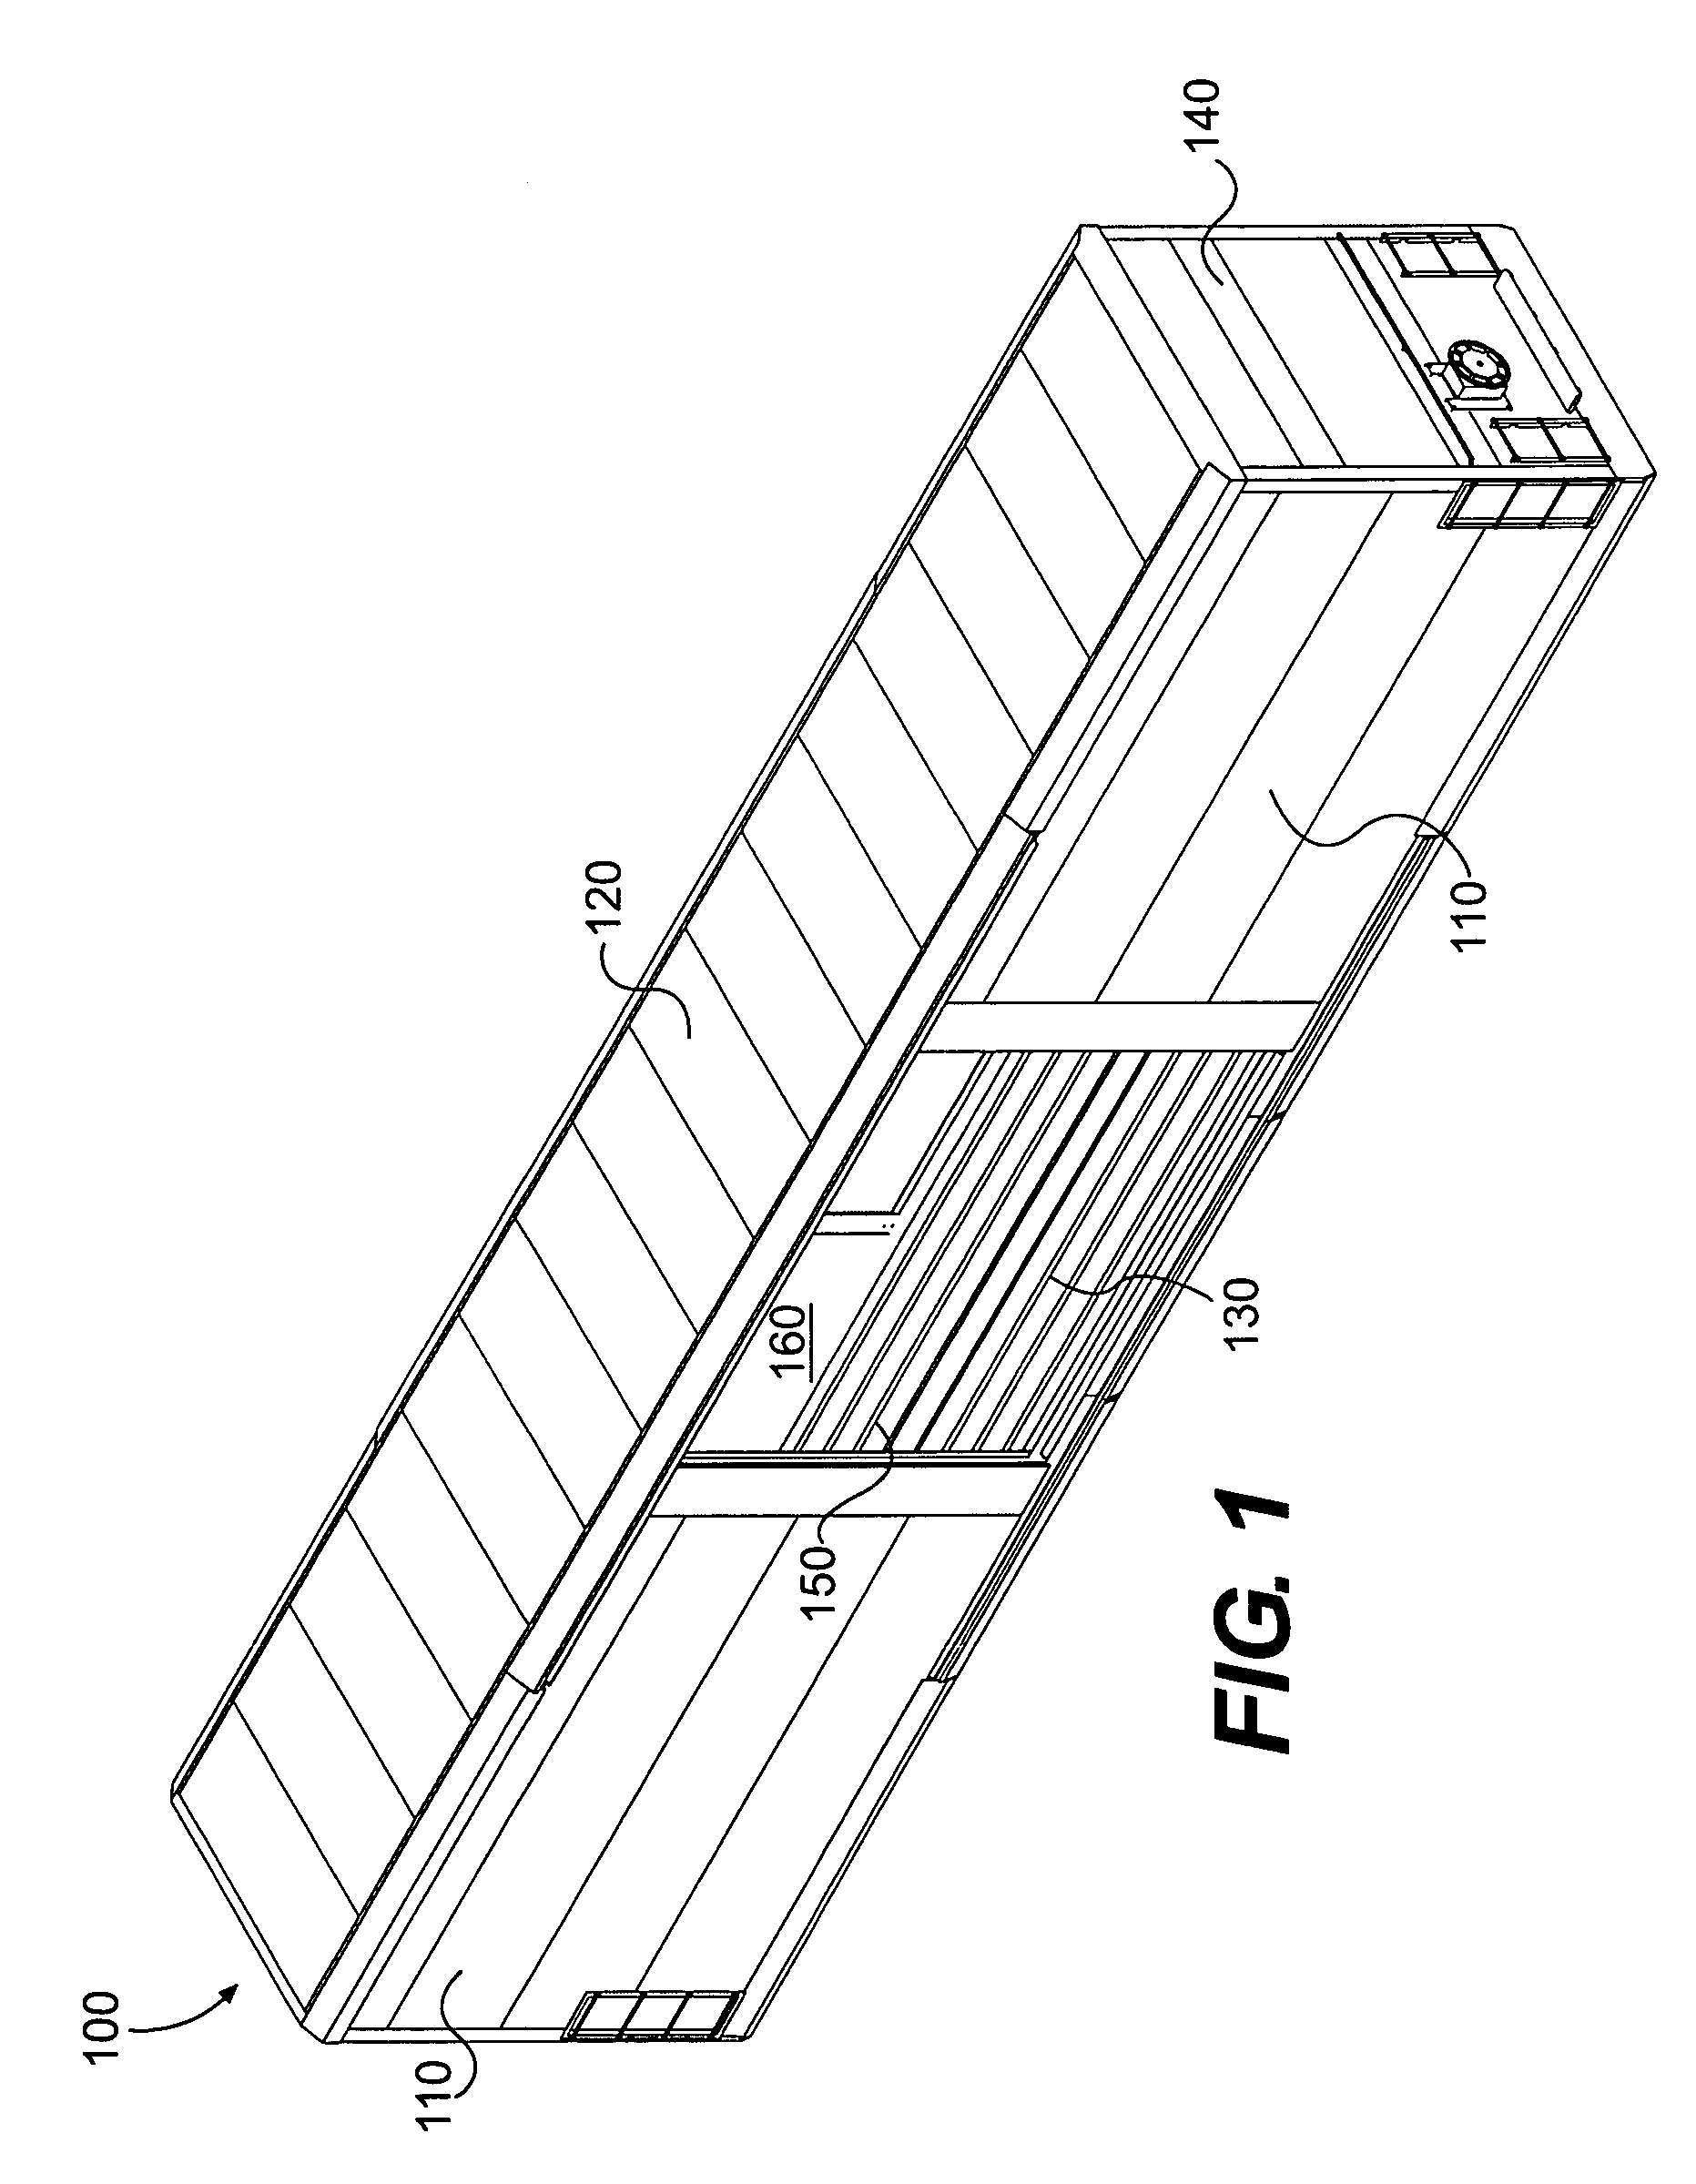 Cargo container with insulated floor